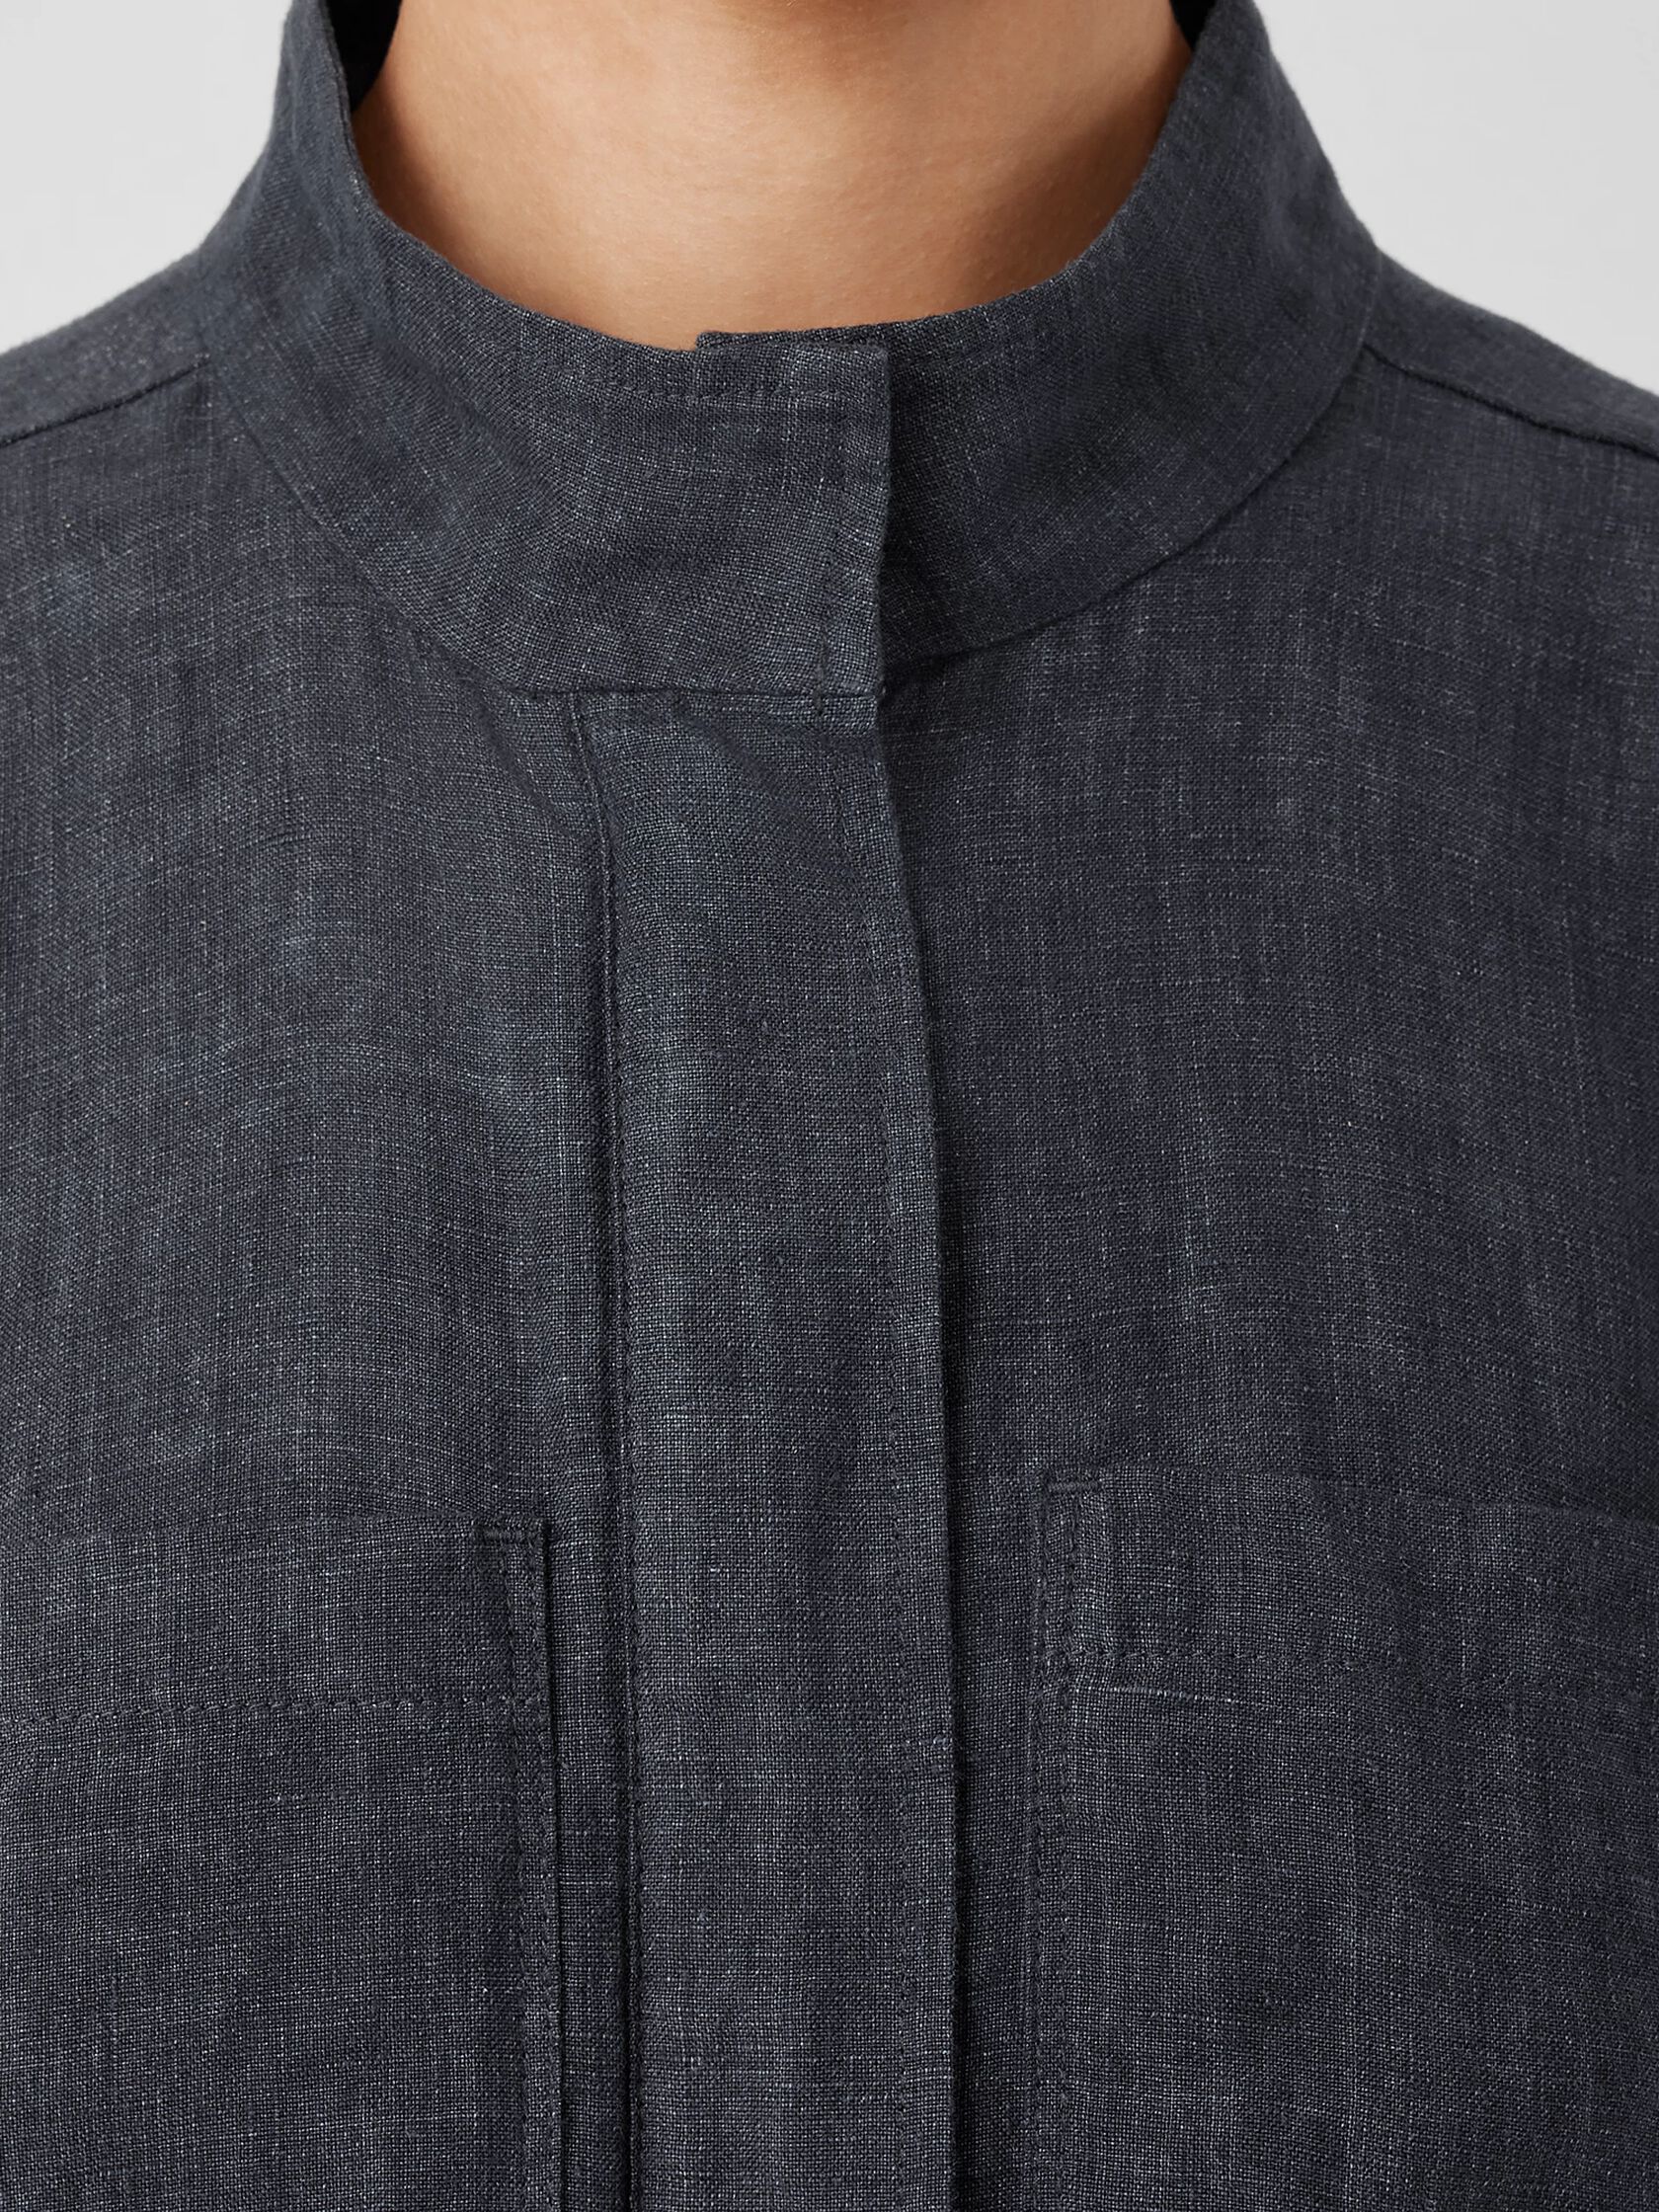 Washed Organic Linen Délavé Stand Collar Jacket